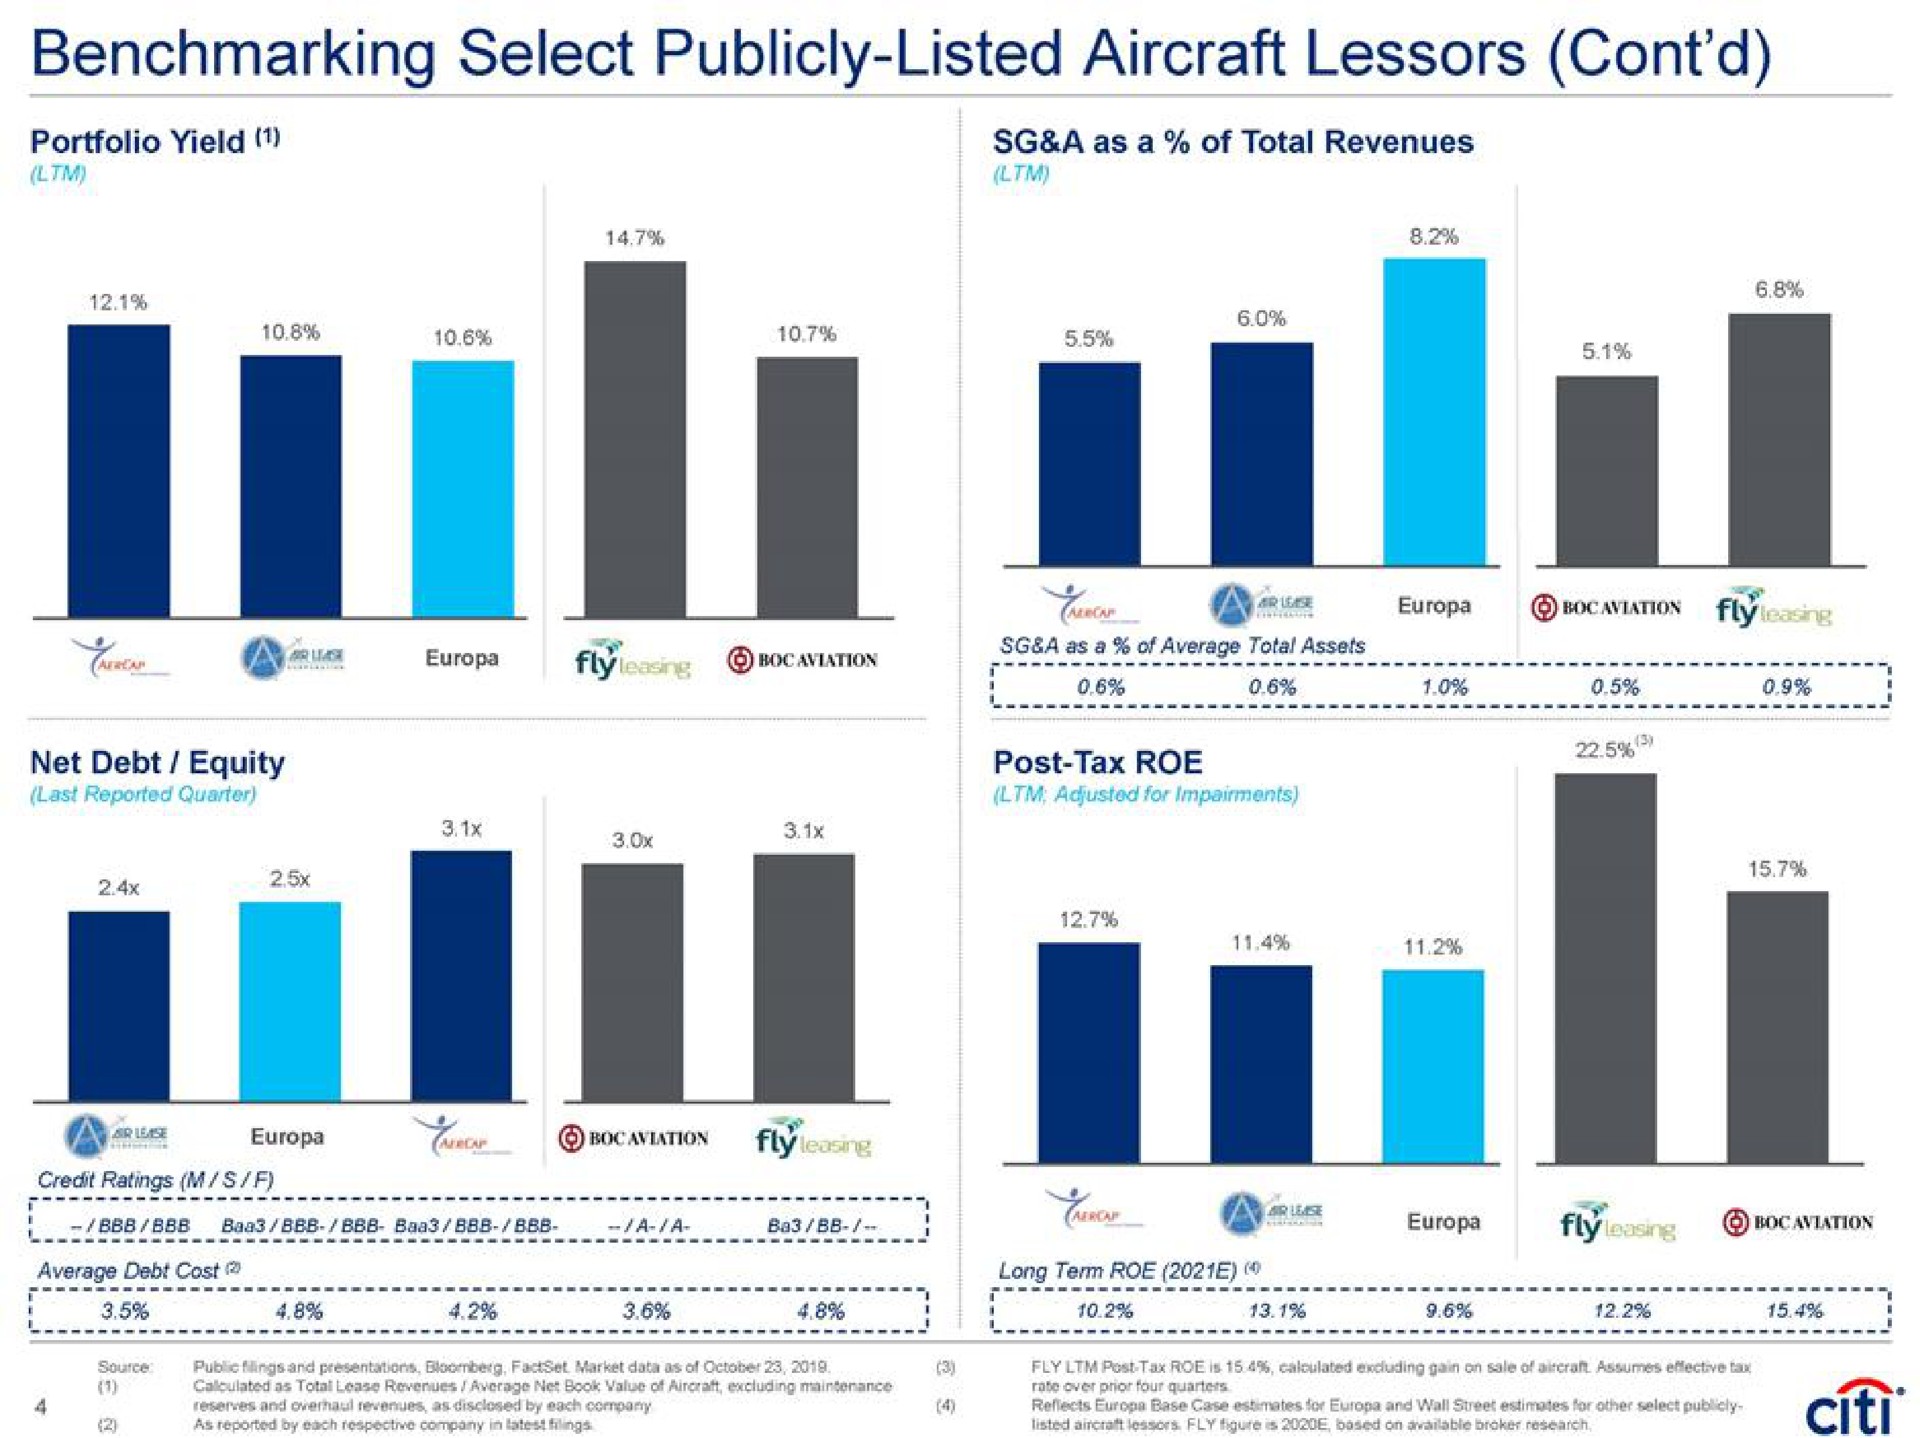 select publicly listed aircraft lessors portfolio yield a as a of total revenues lee eel net debt equity post tax roe coe | Citi